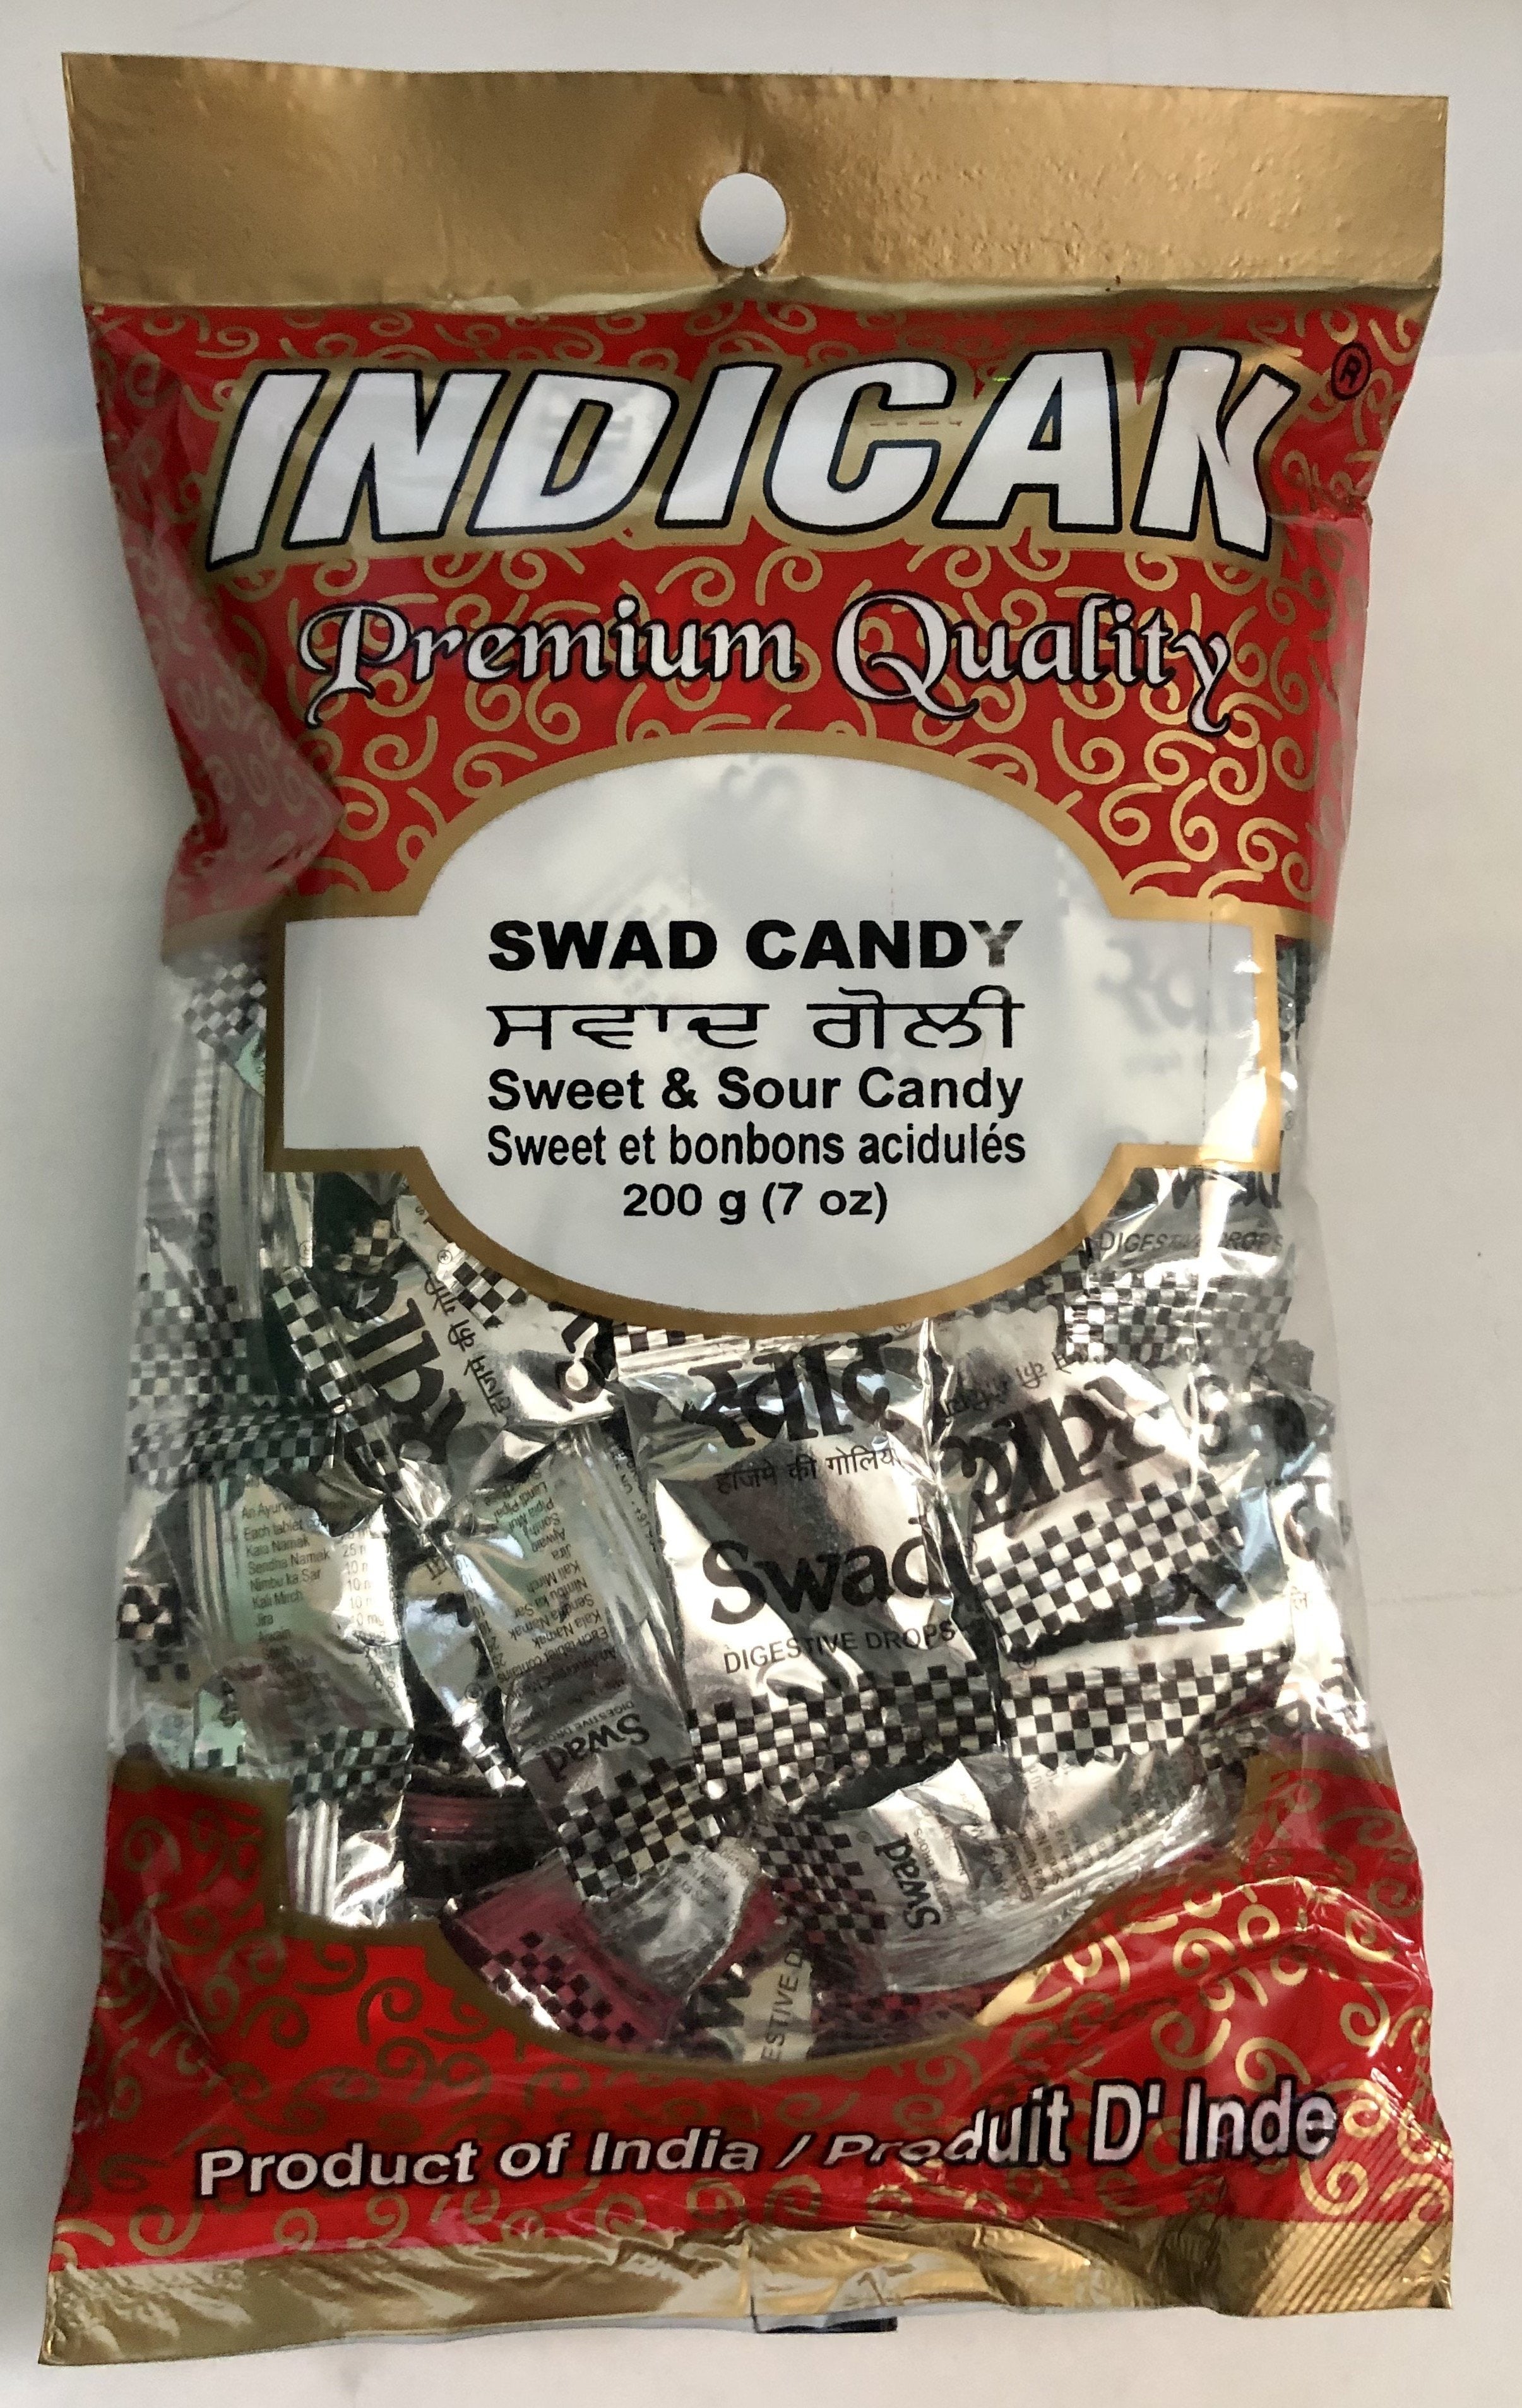 Sweet & Sour SWAD CANDY  - 200 g - Indican